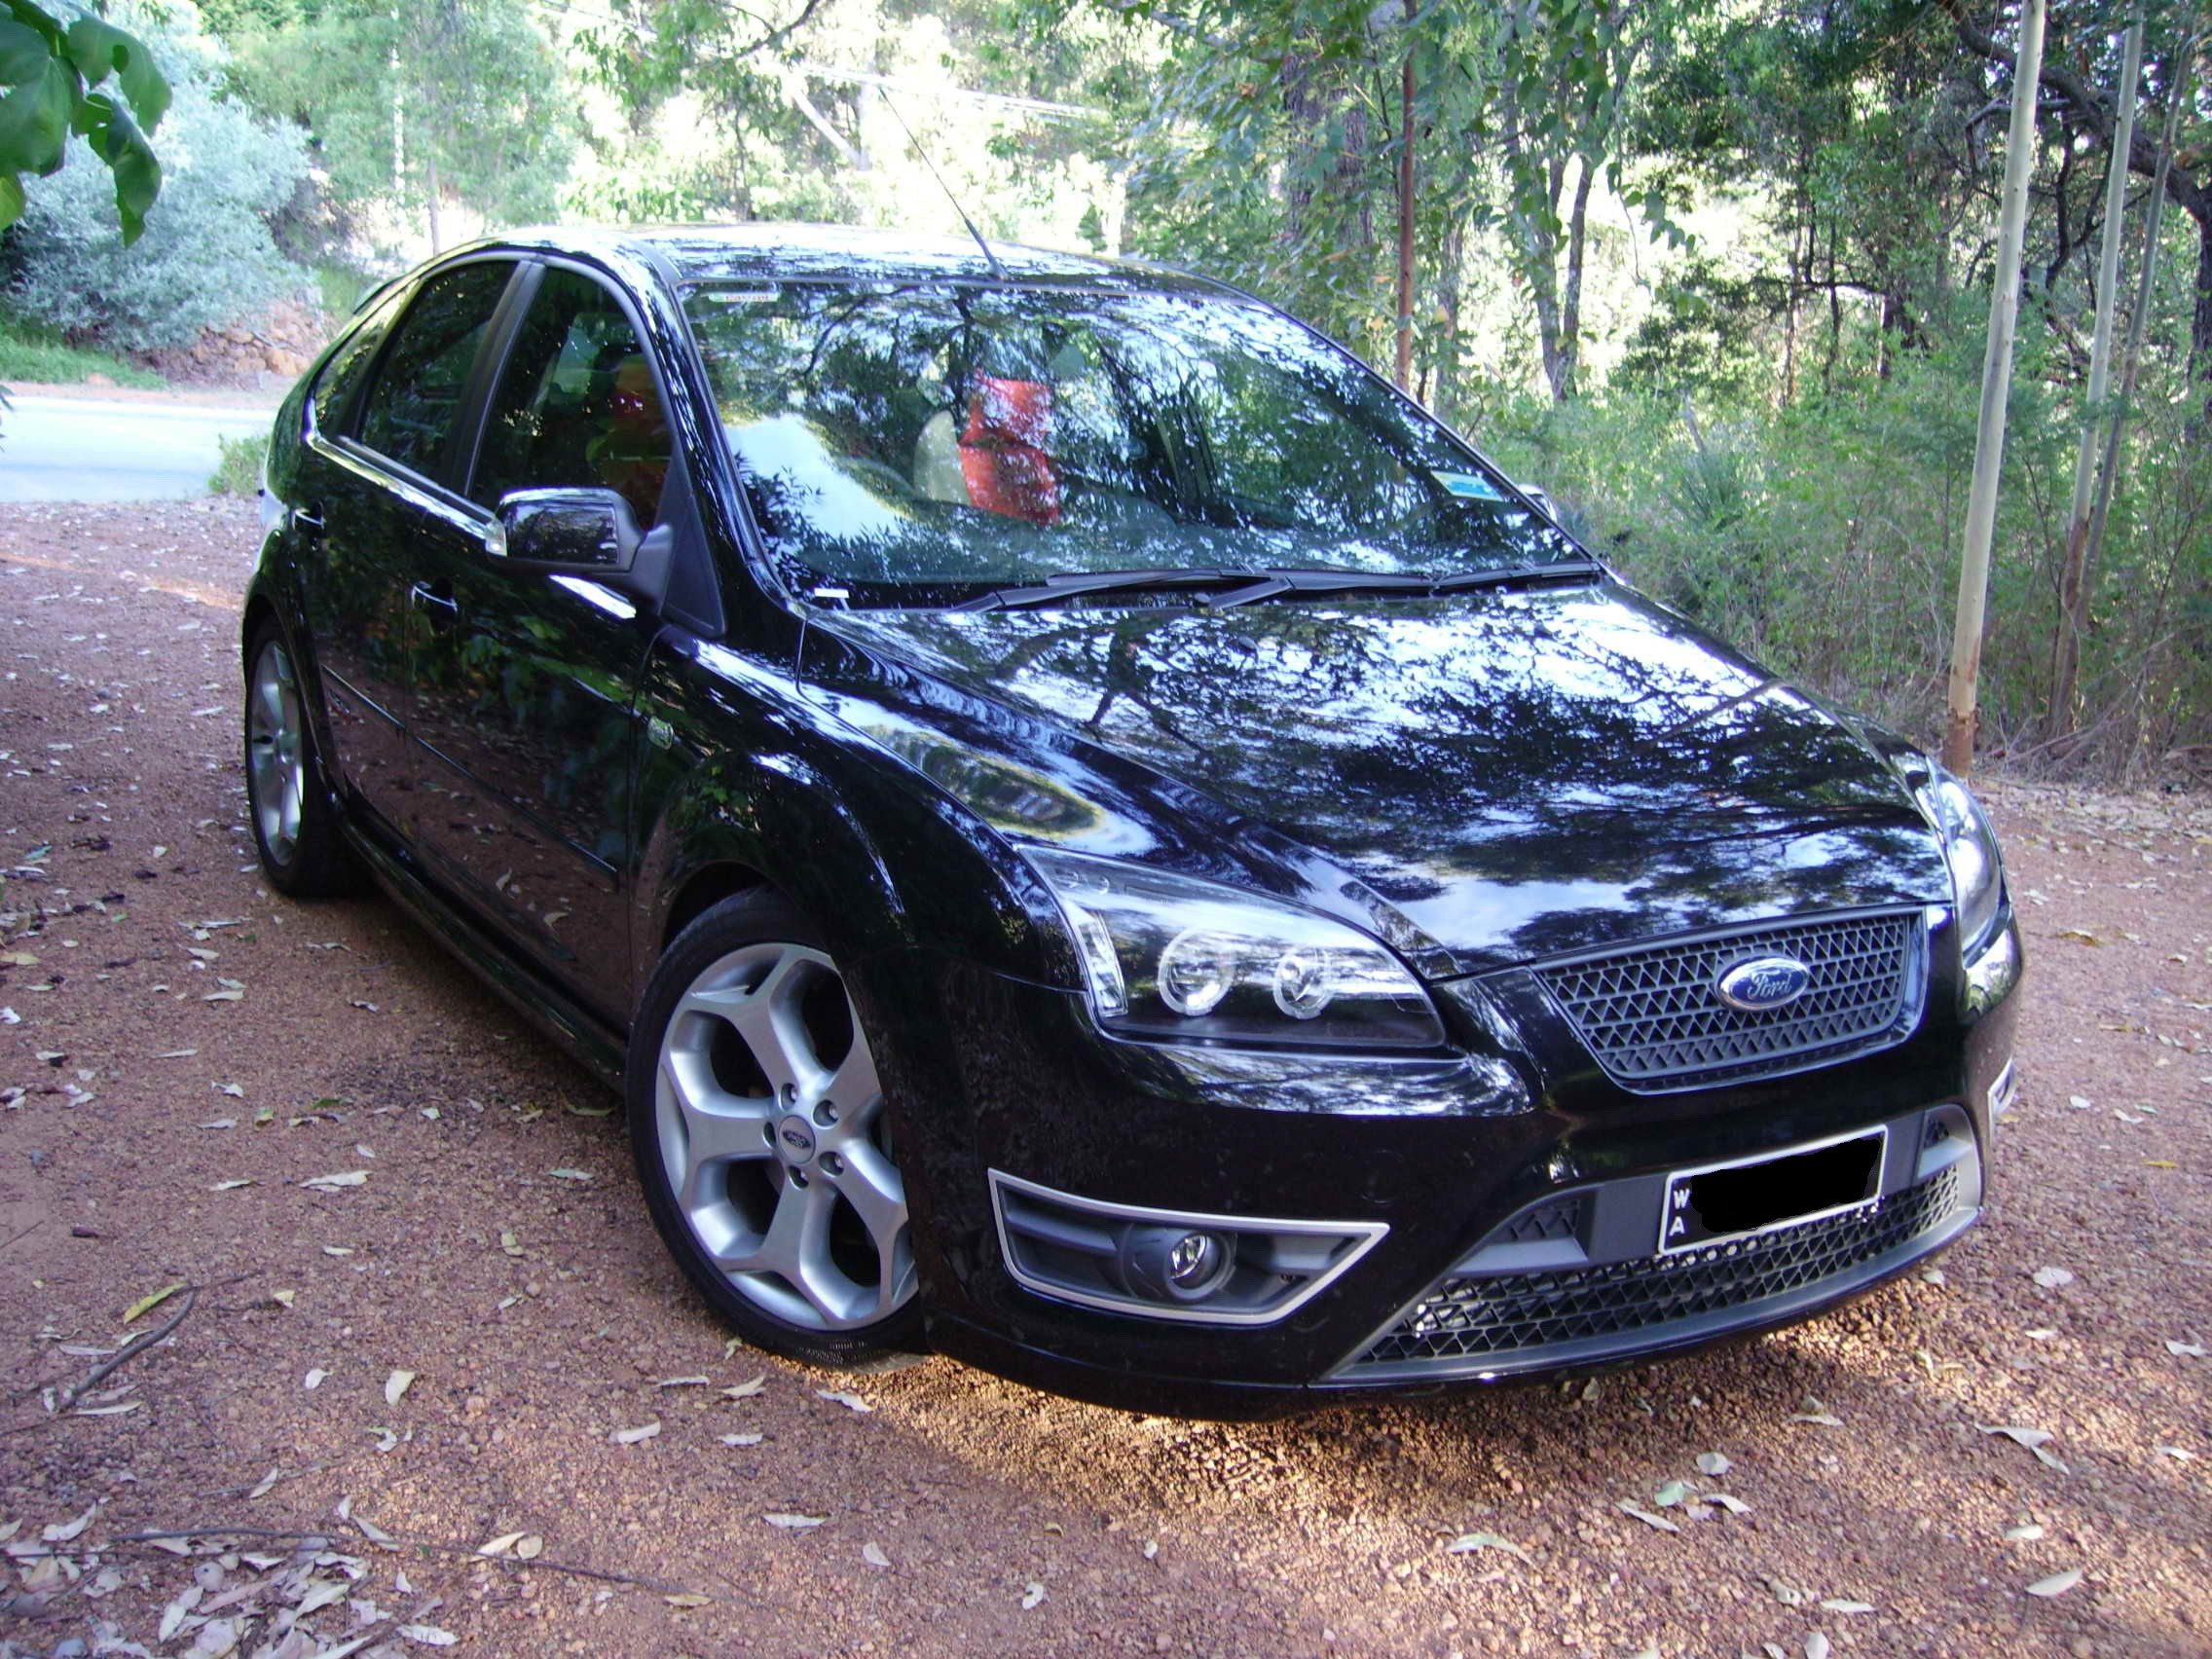 Click HERE to view any videos, mods or upgrades to this Ford Focus XR5 Turbo 